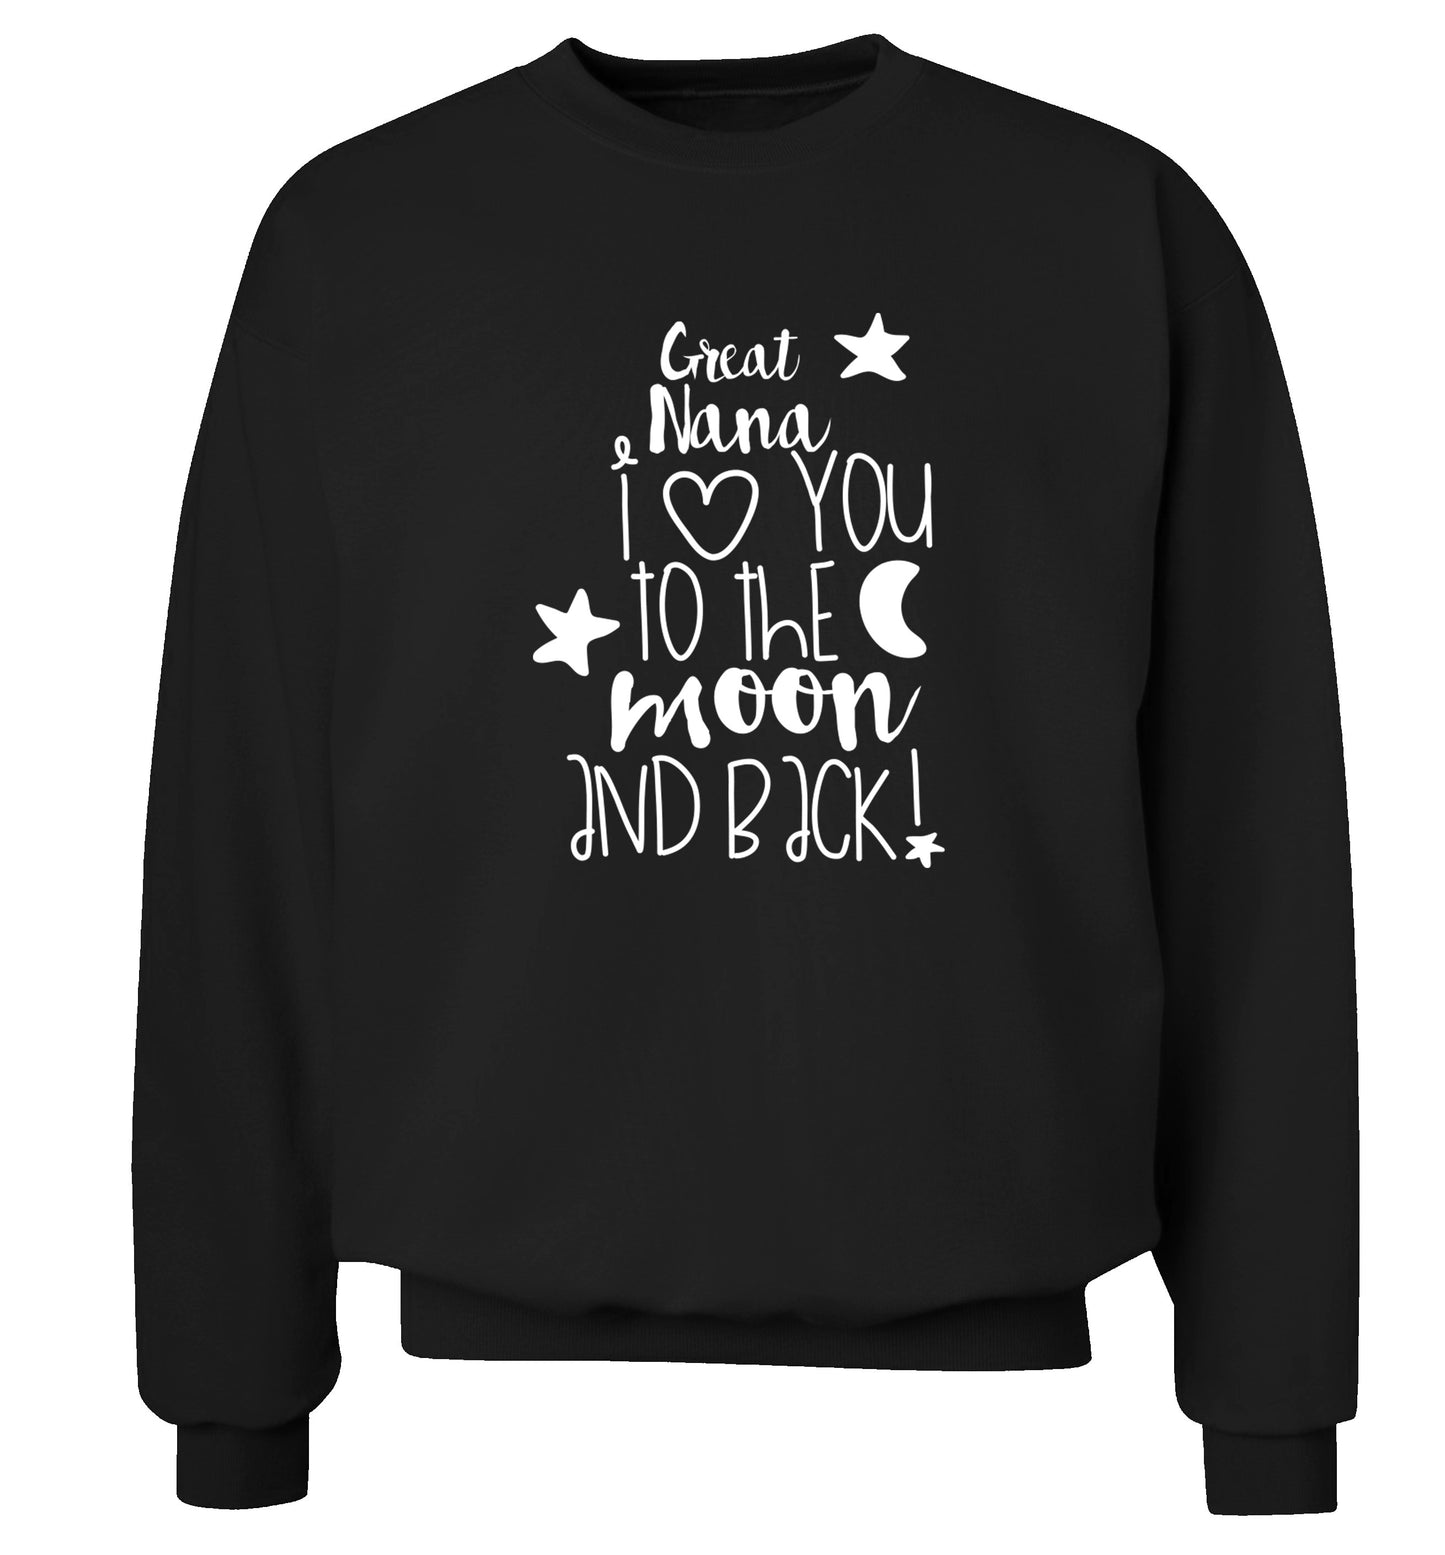 Great Nana I love you to the moon and back Adult's unisex black  sweater 2XL